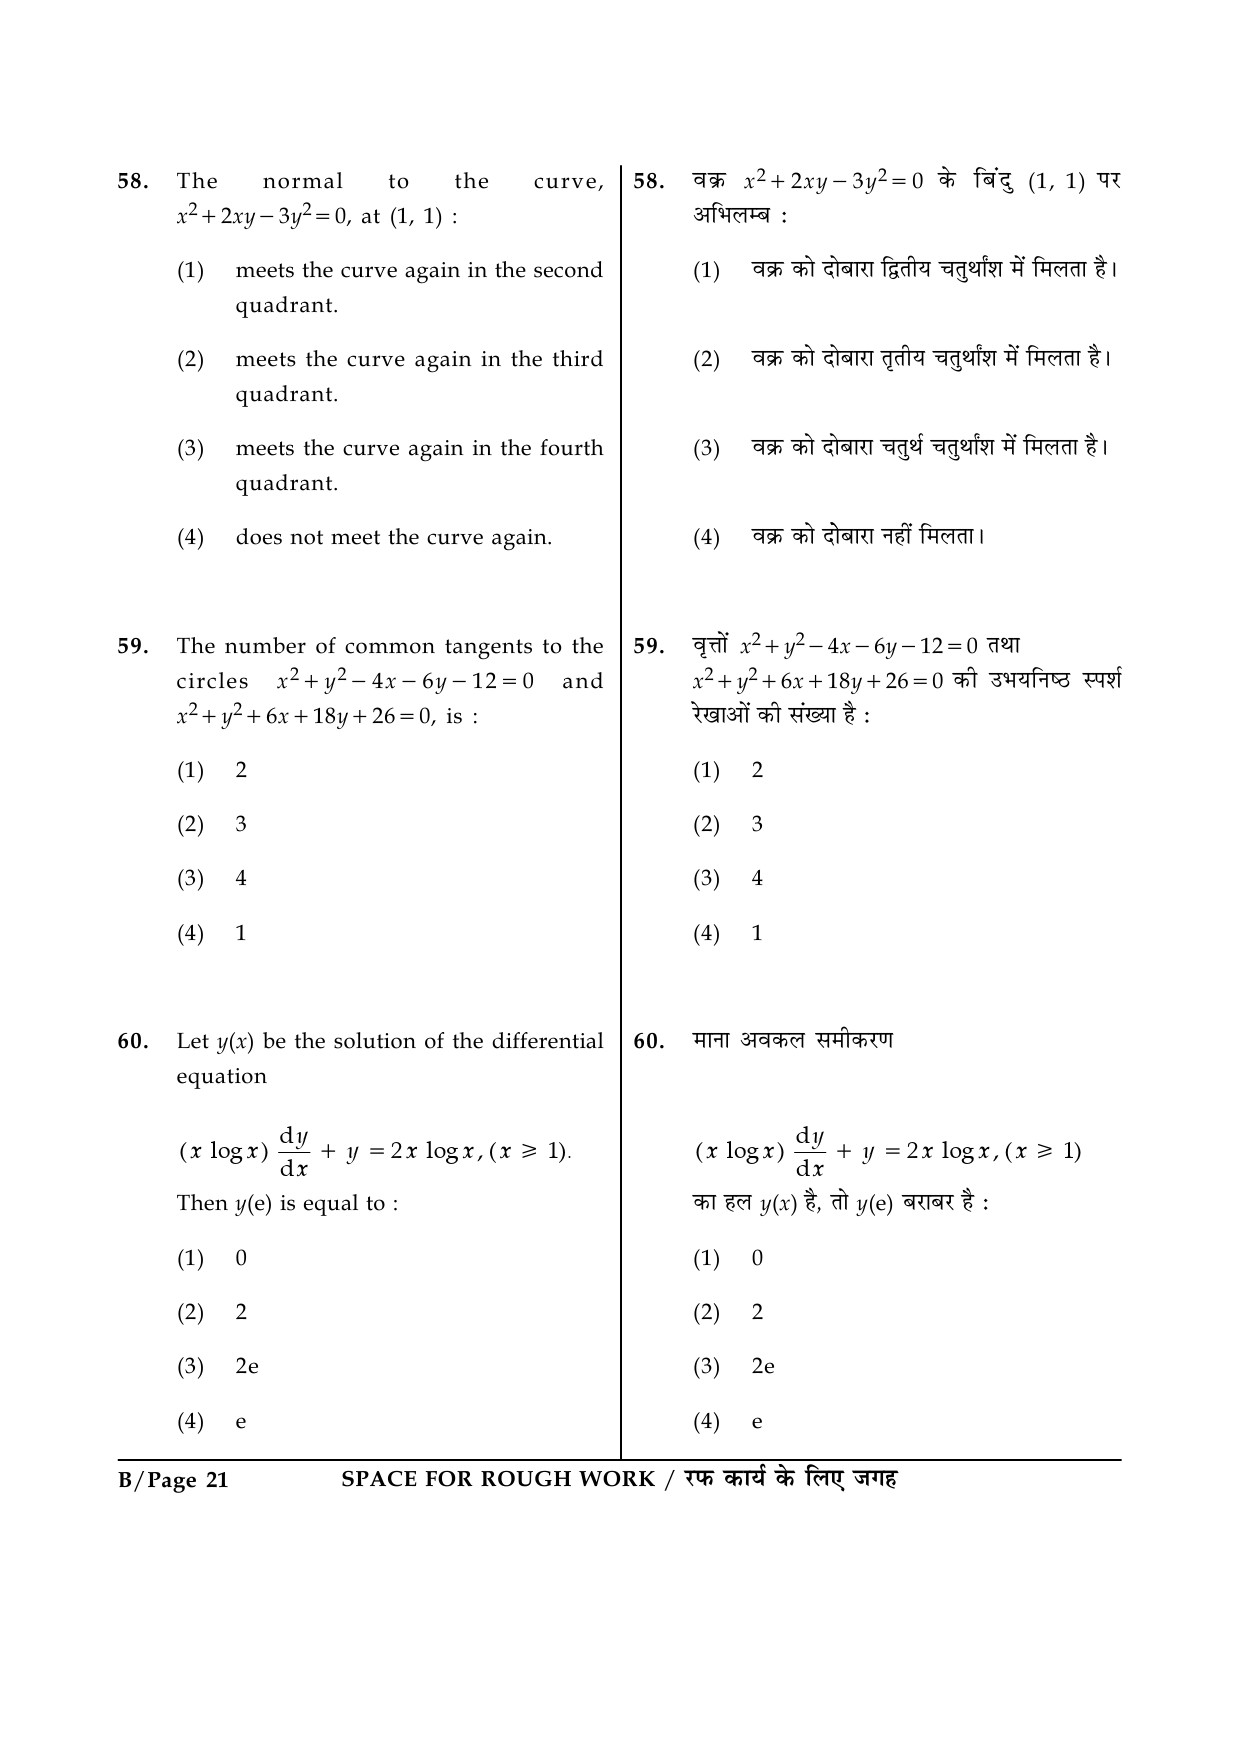 JEE Main Exam Question Paper 2015 Booklet B 21